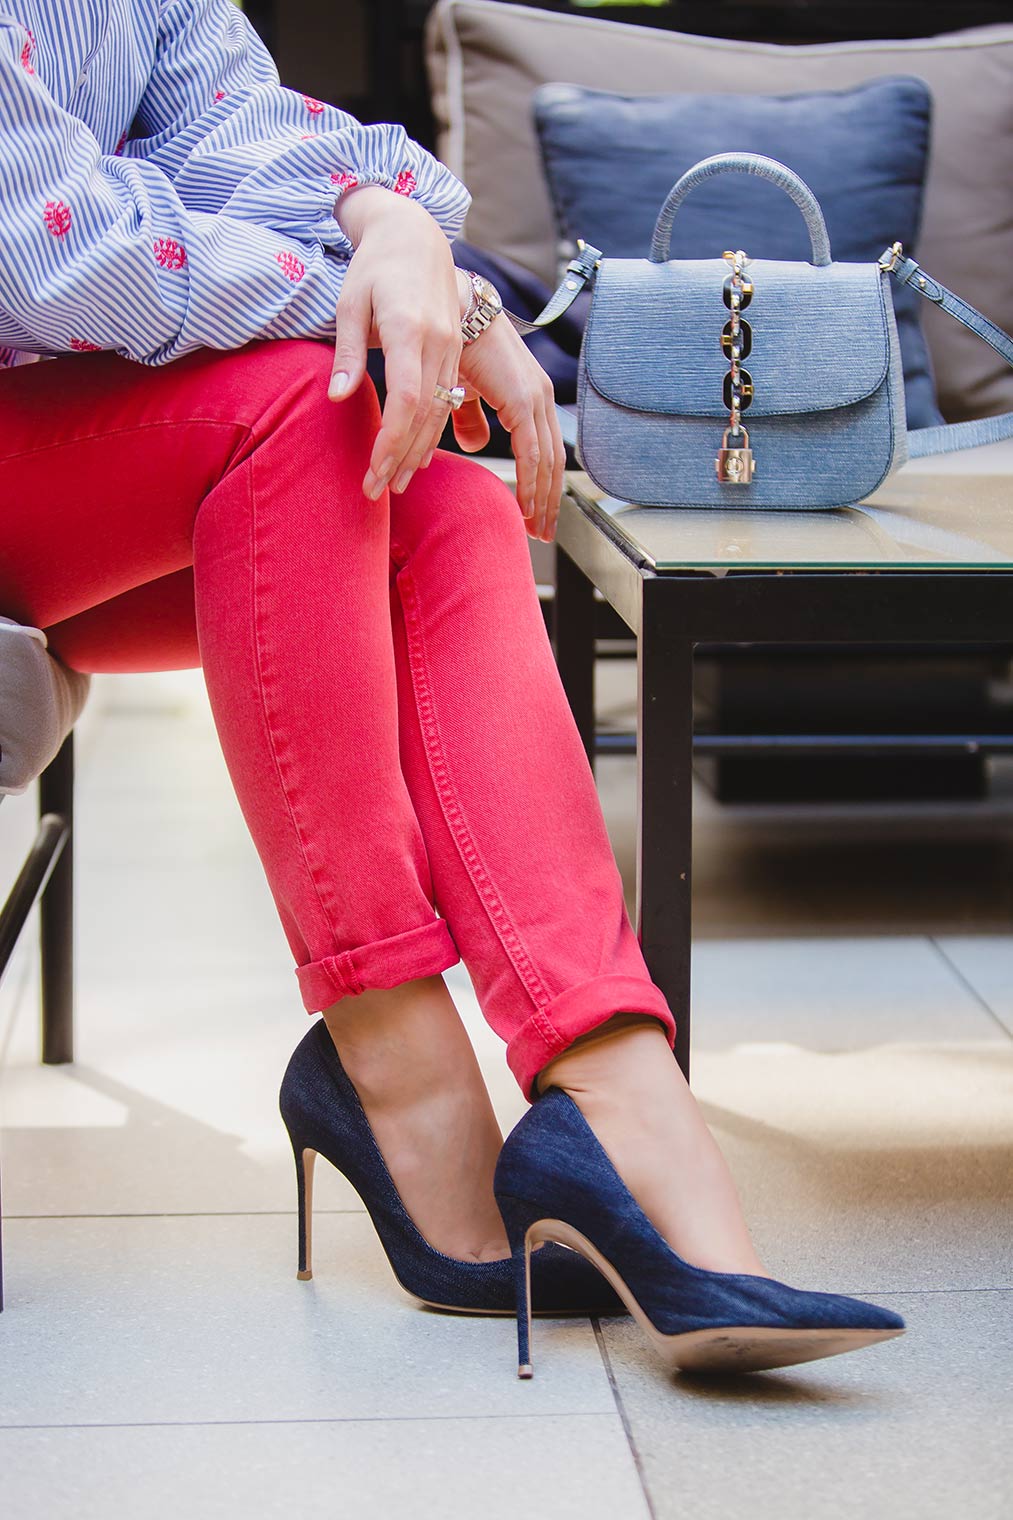 Gianvito Rossi pumps, red jeans and Louis Vuitton bag